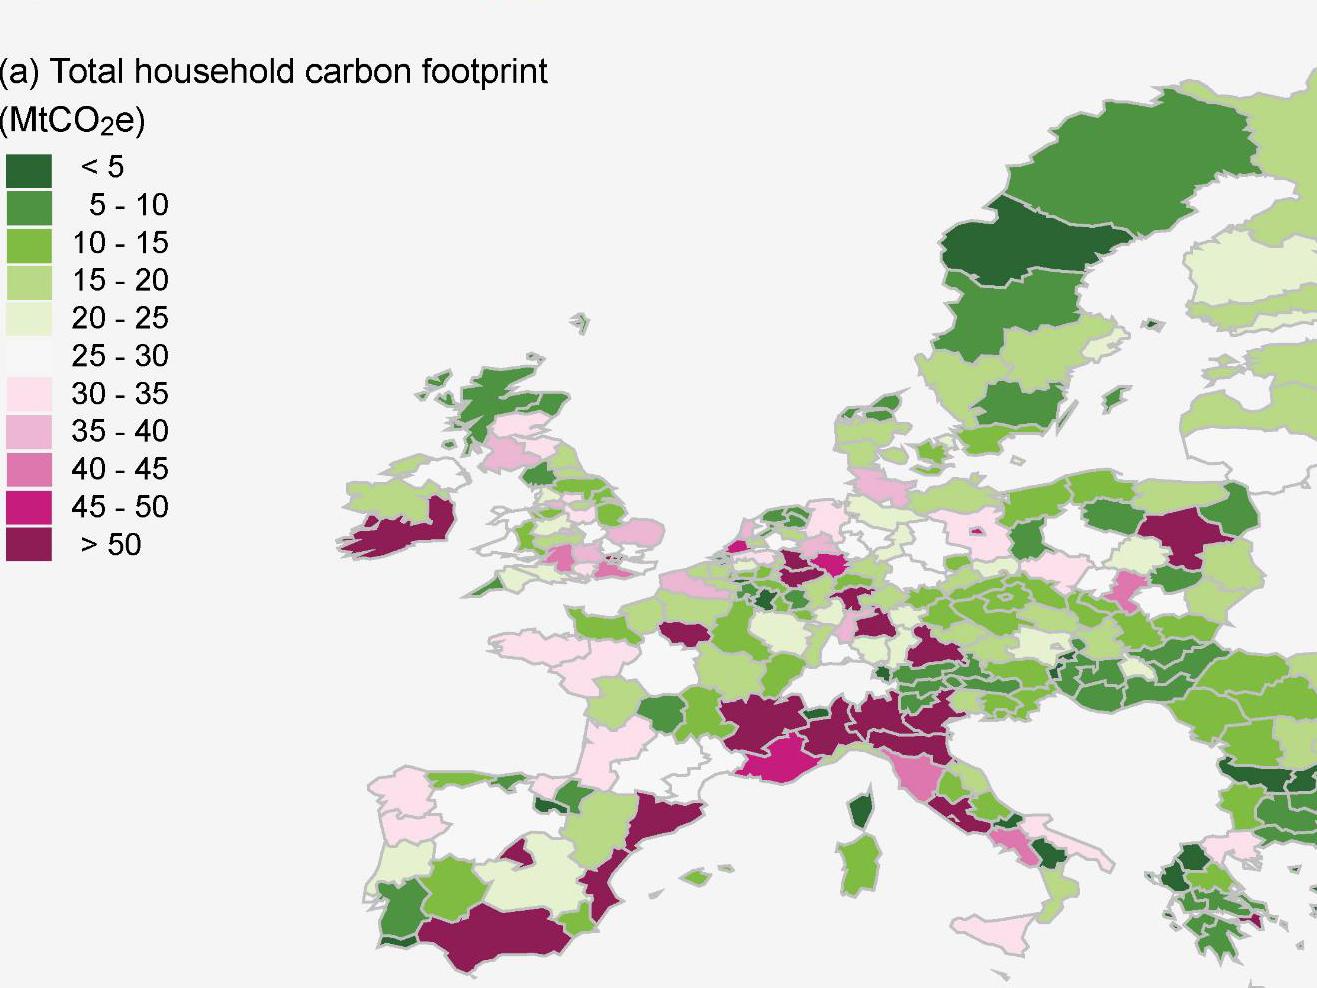 Total household carbon footprint in megatonnes of carbon dioxide equivalent